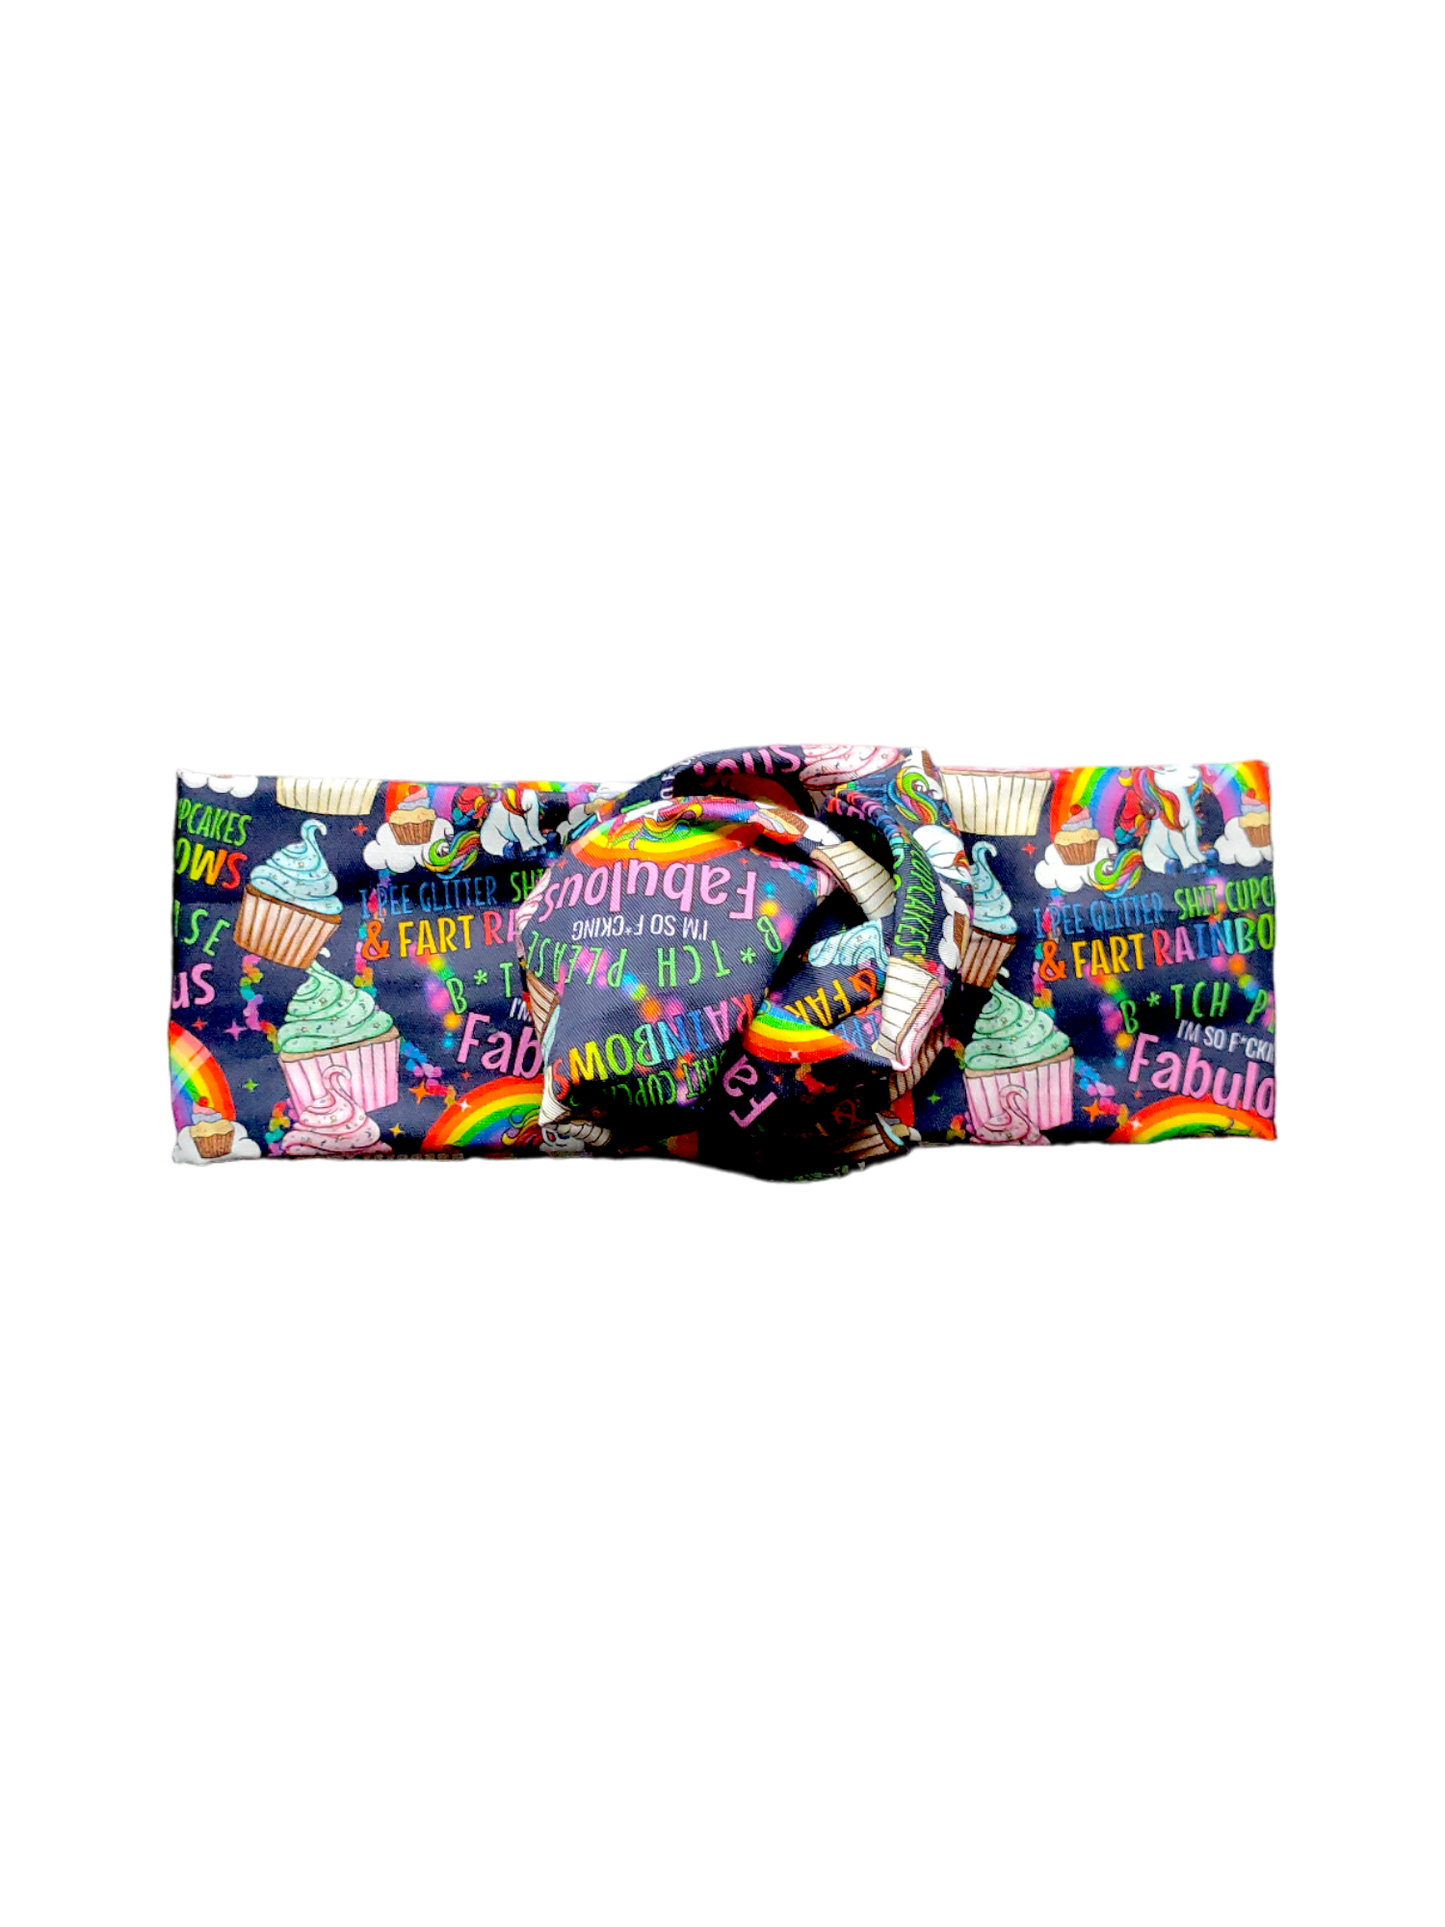 BETTY BOO BANDS™ WIRED HEADWRAP | 18+ Swear Band | B*tch Please I"m so F*cking Fabulous, I Pee Glitter Sh*t Cupcakes & F*rt Rainbows